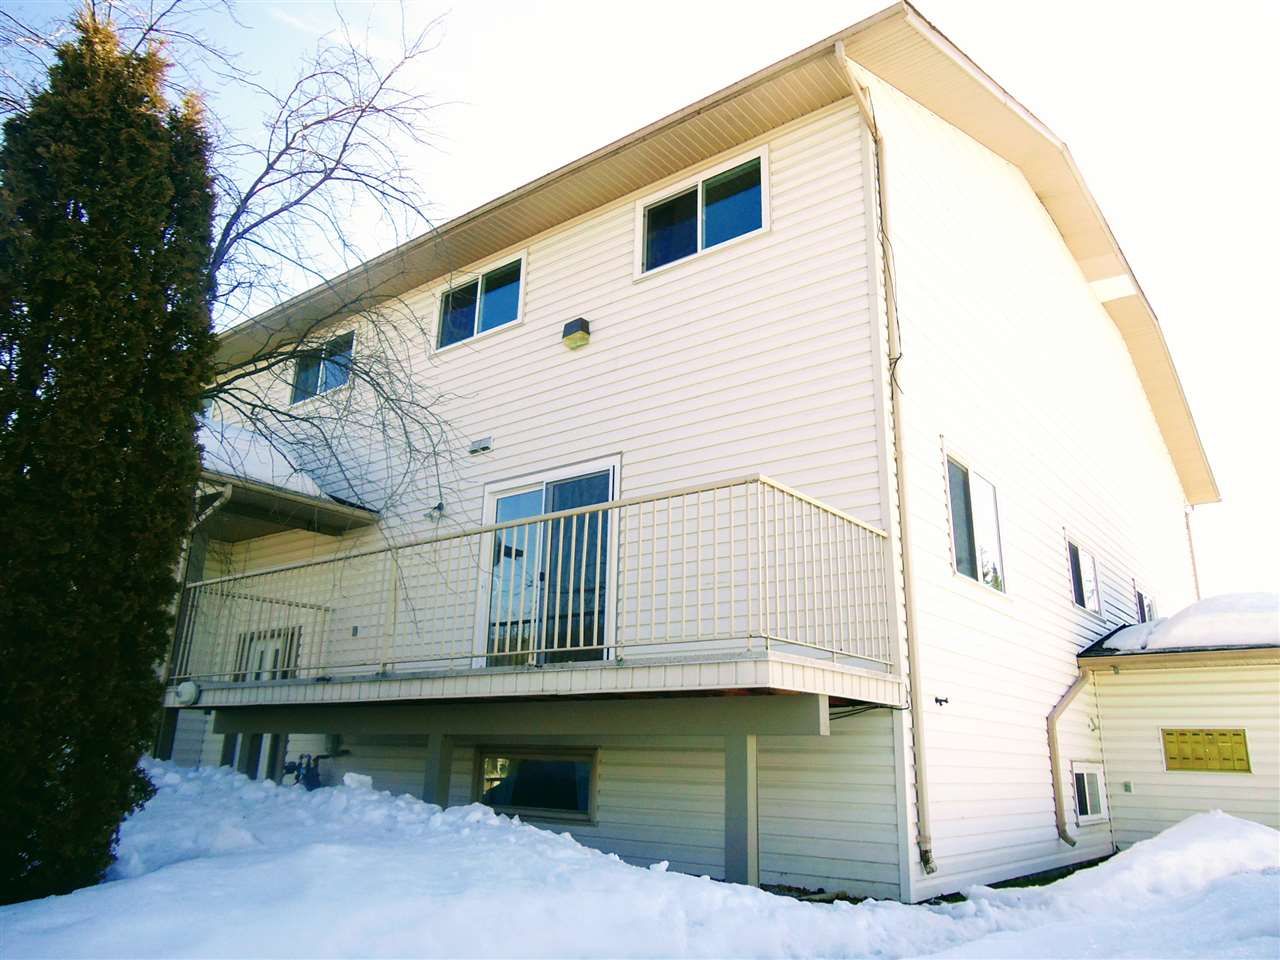 Main Photo: 130 4045 22ND Avenue in Prince George: Pinewood Townhouse for sale (PG City West (Zone 71))  : MLS®# R2352301